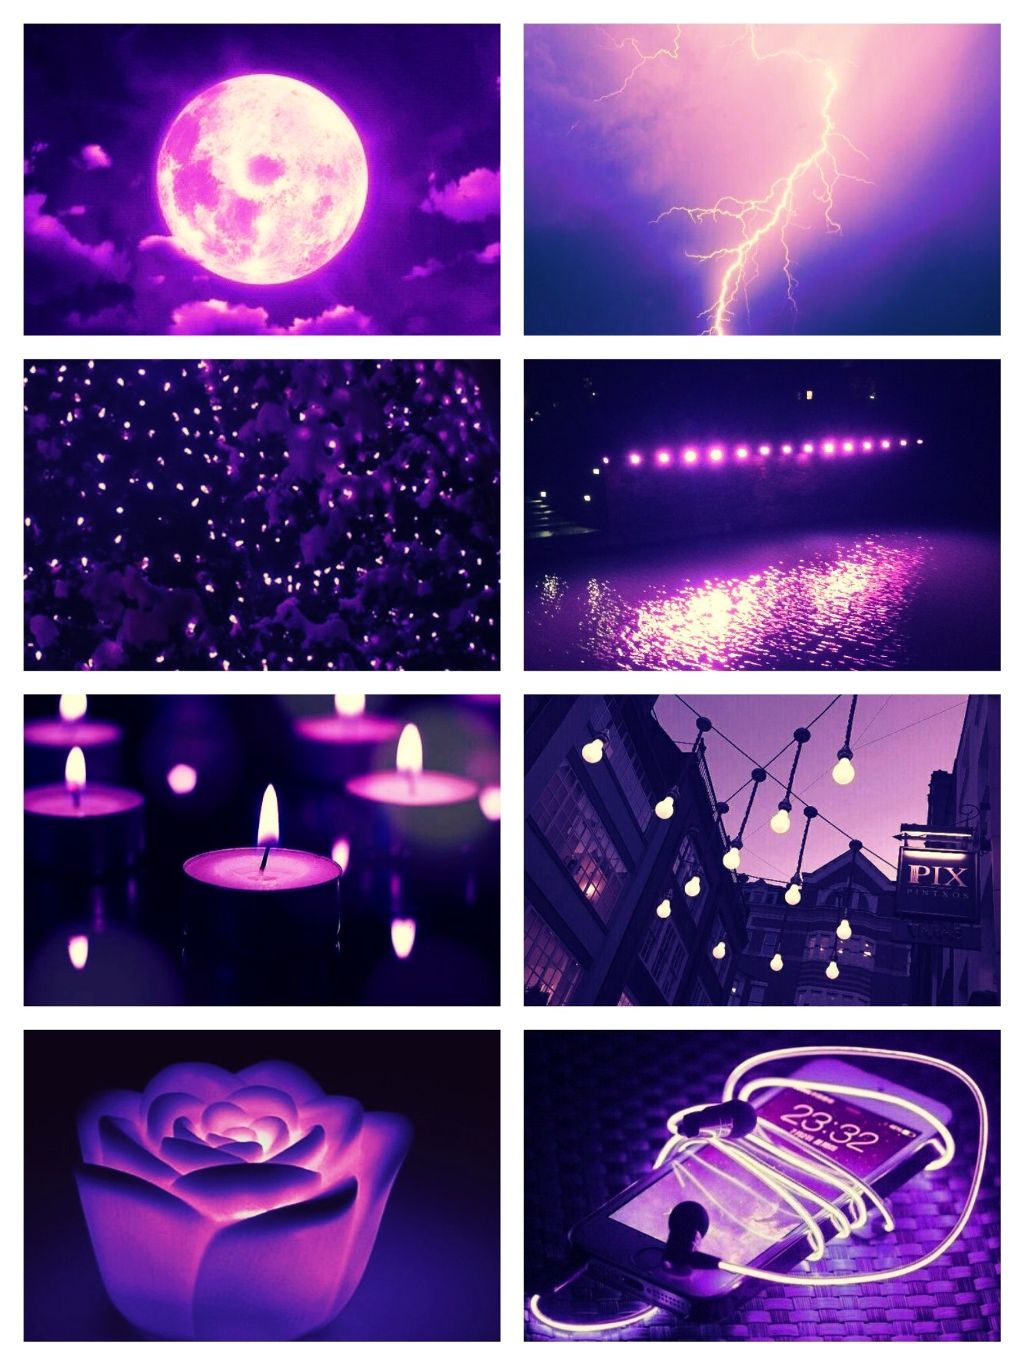 Last moodboard/ Aesthetic from the theme of "Purple Lig...